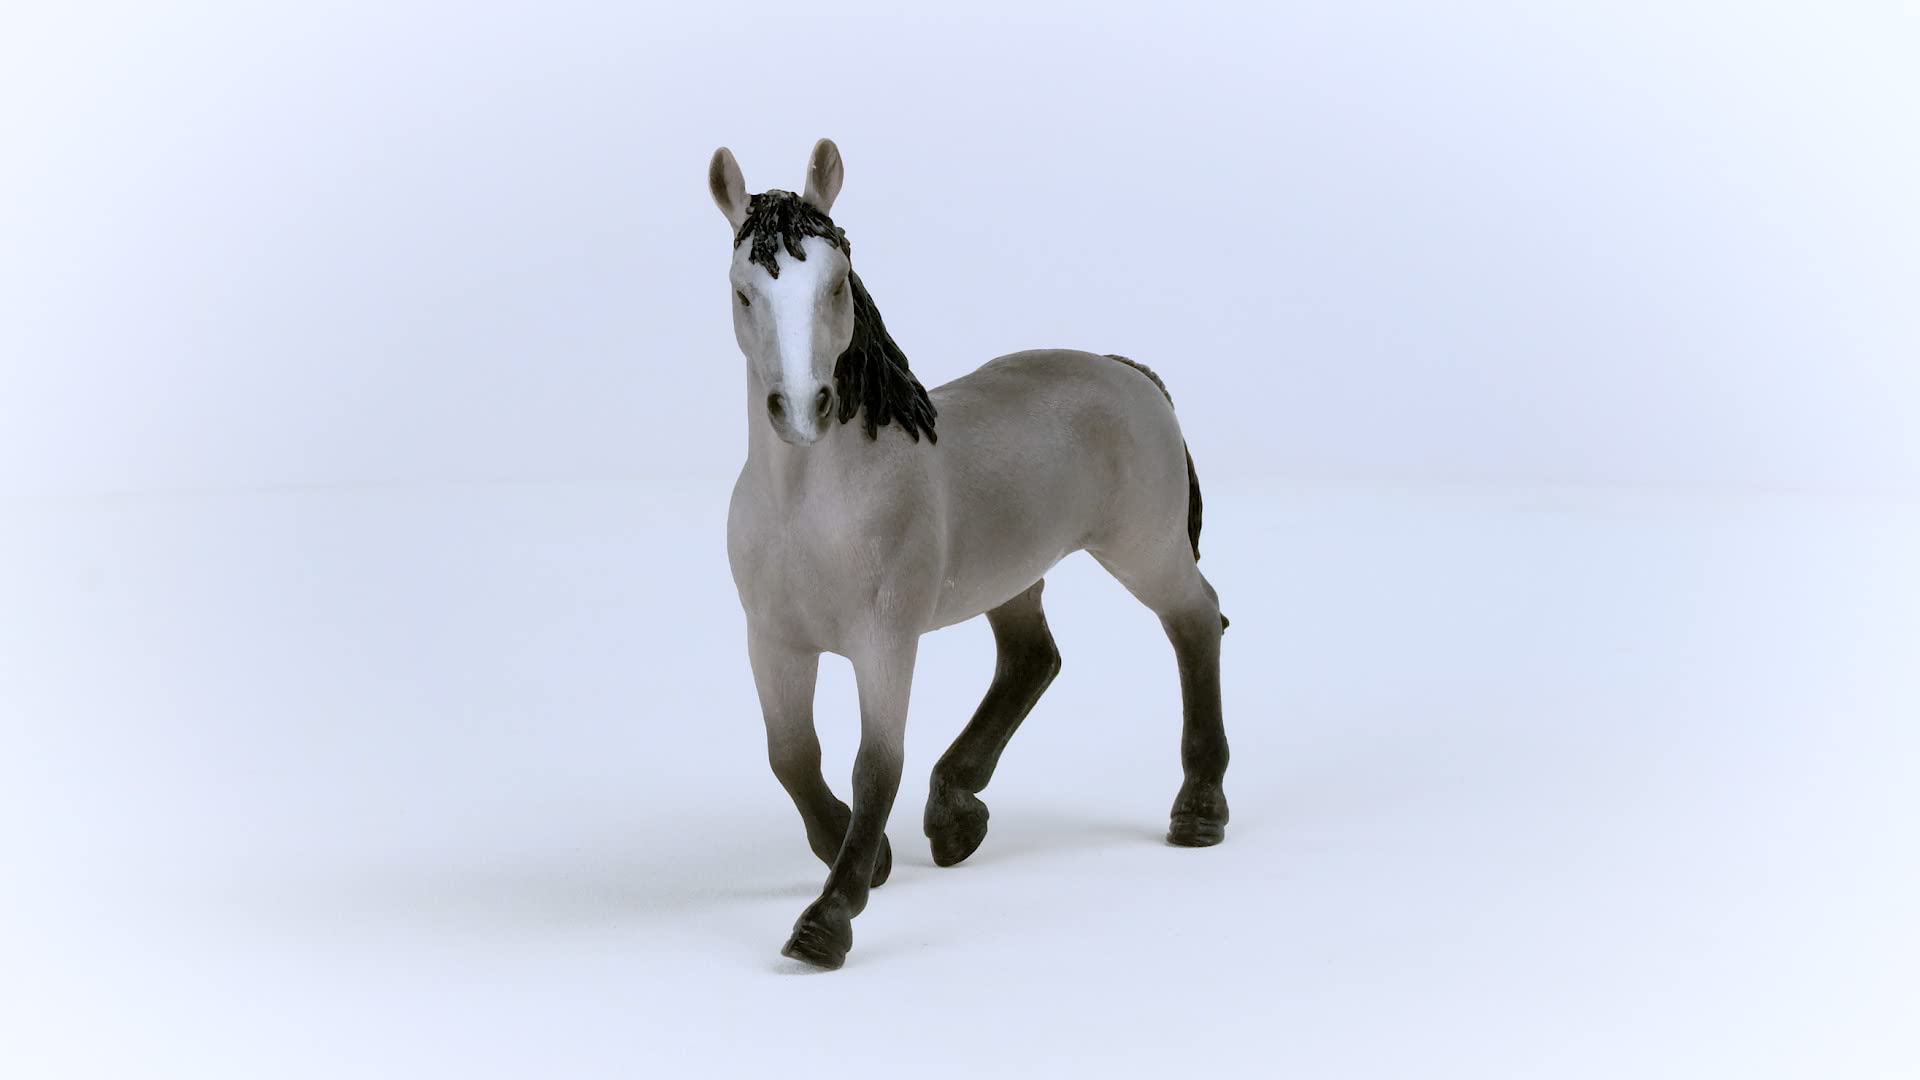 Schleich Horses 2023, Horse Club, Horse Toys for Girls and Boys Cheval de Selle Francais Stallion Horse Toy Figurine, Ages 5+